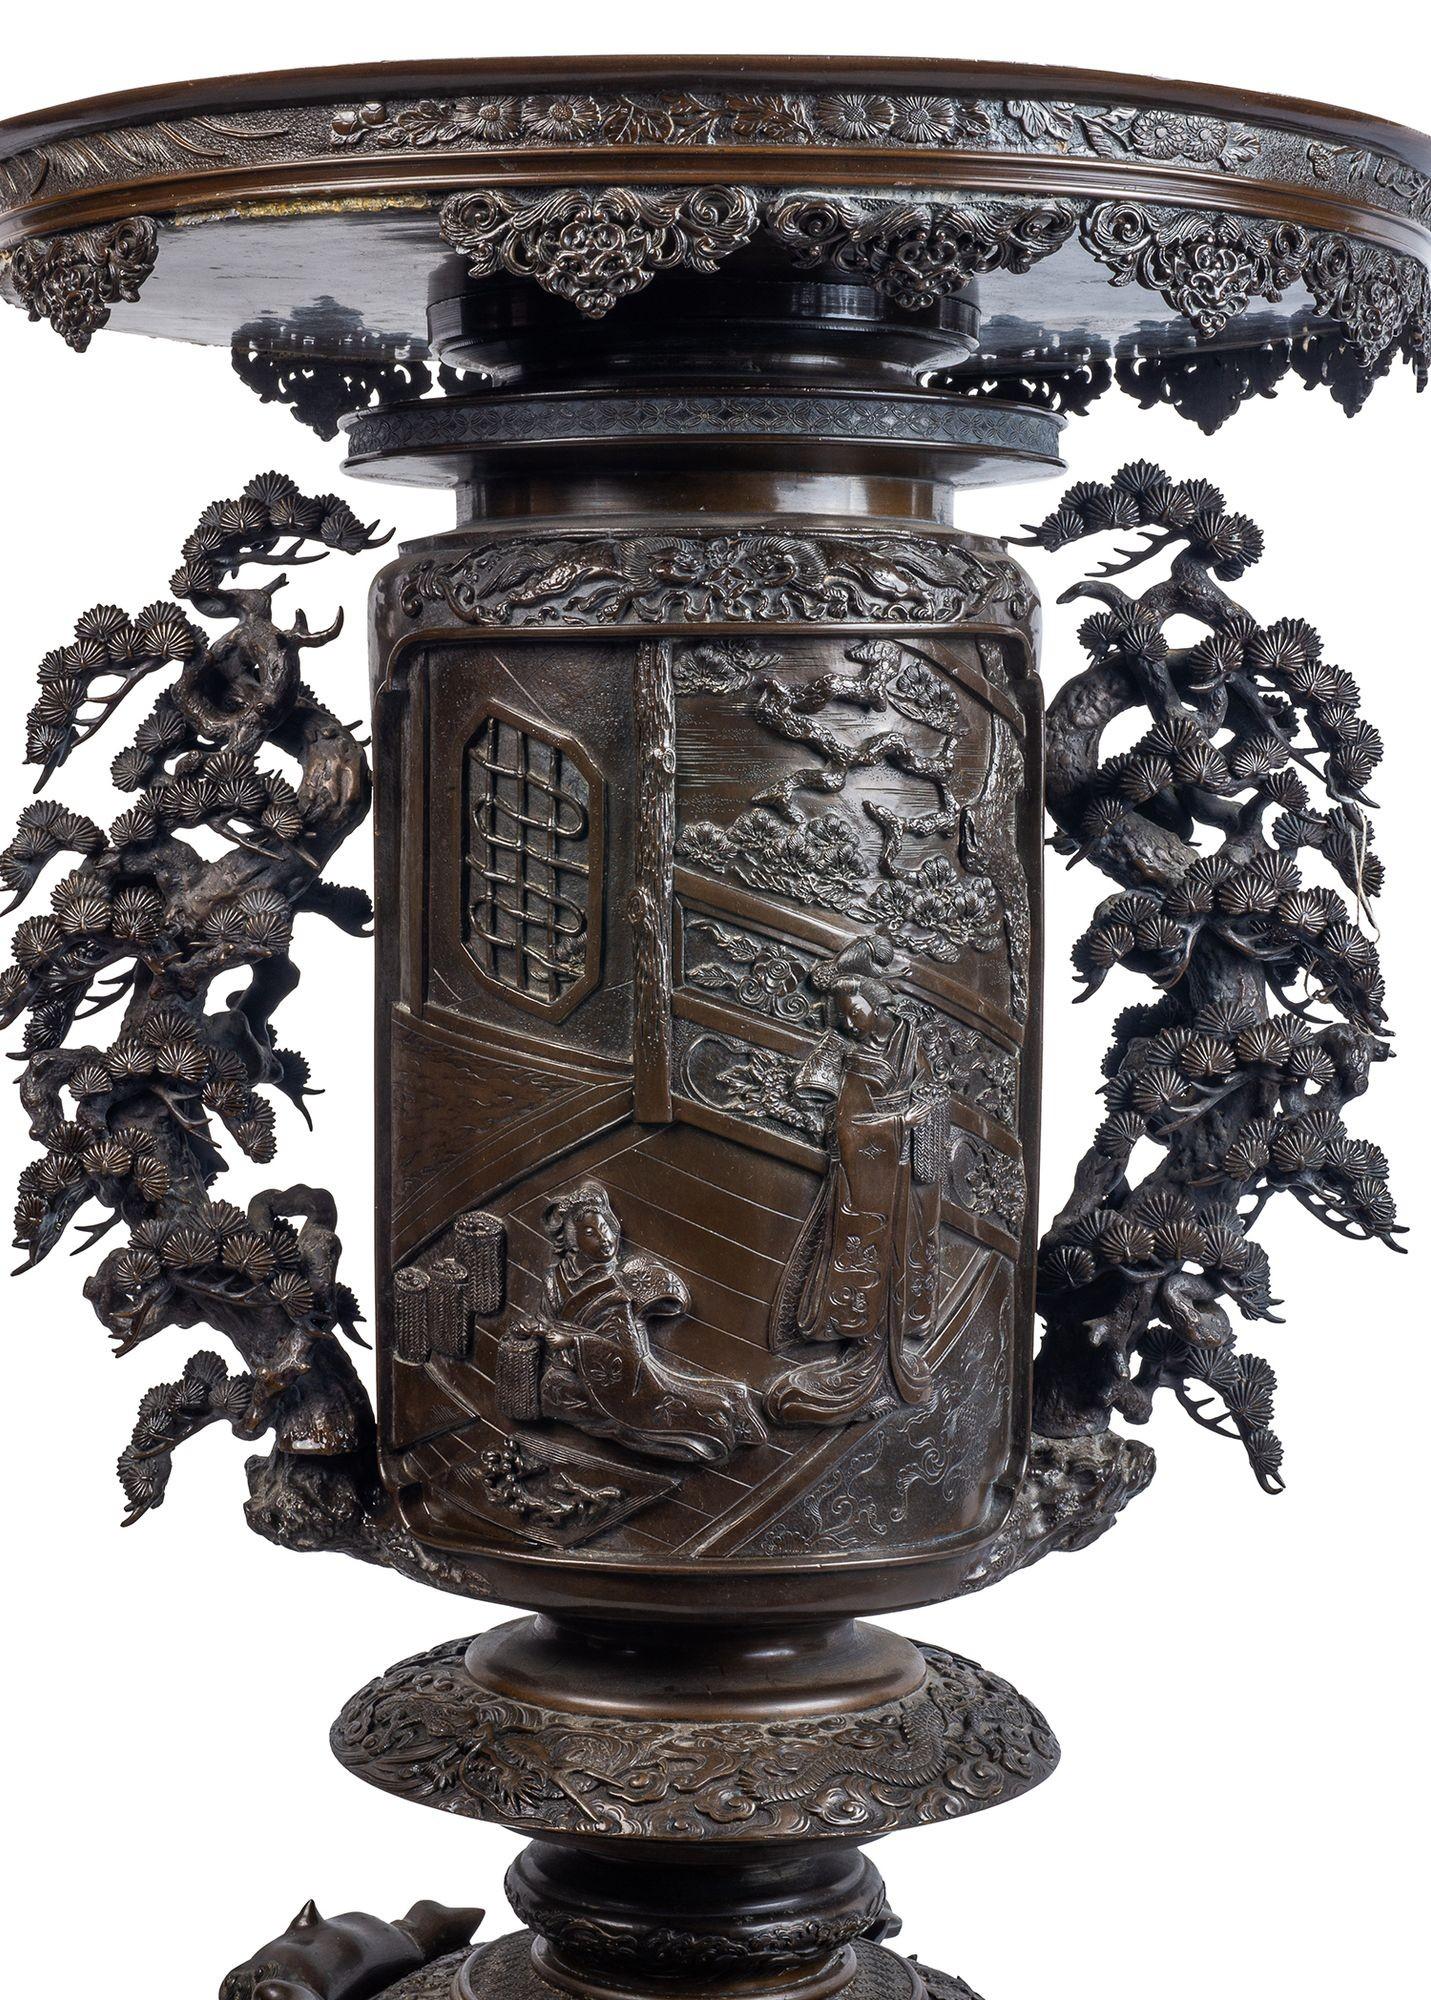 A very impressive and decorative Japanese Meiji period (1868-1912) bronze Censor, having wonderful stylised tree like handles either side, inset panels depicting two Geisha girls on a terrace, exotic birds, trees to the reverse. The whole supported